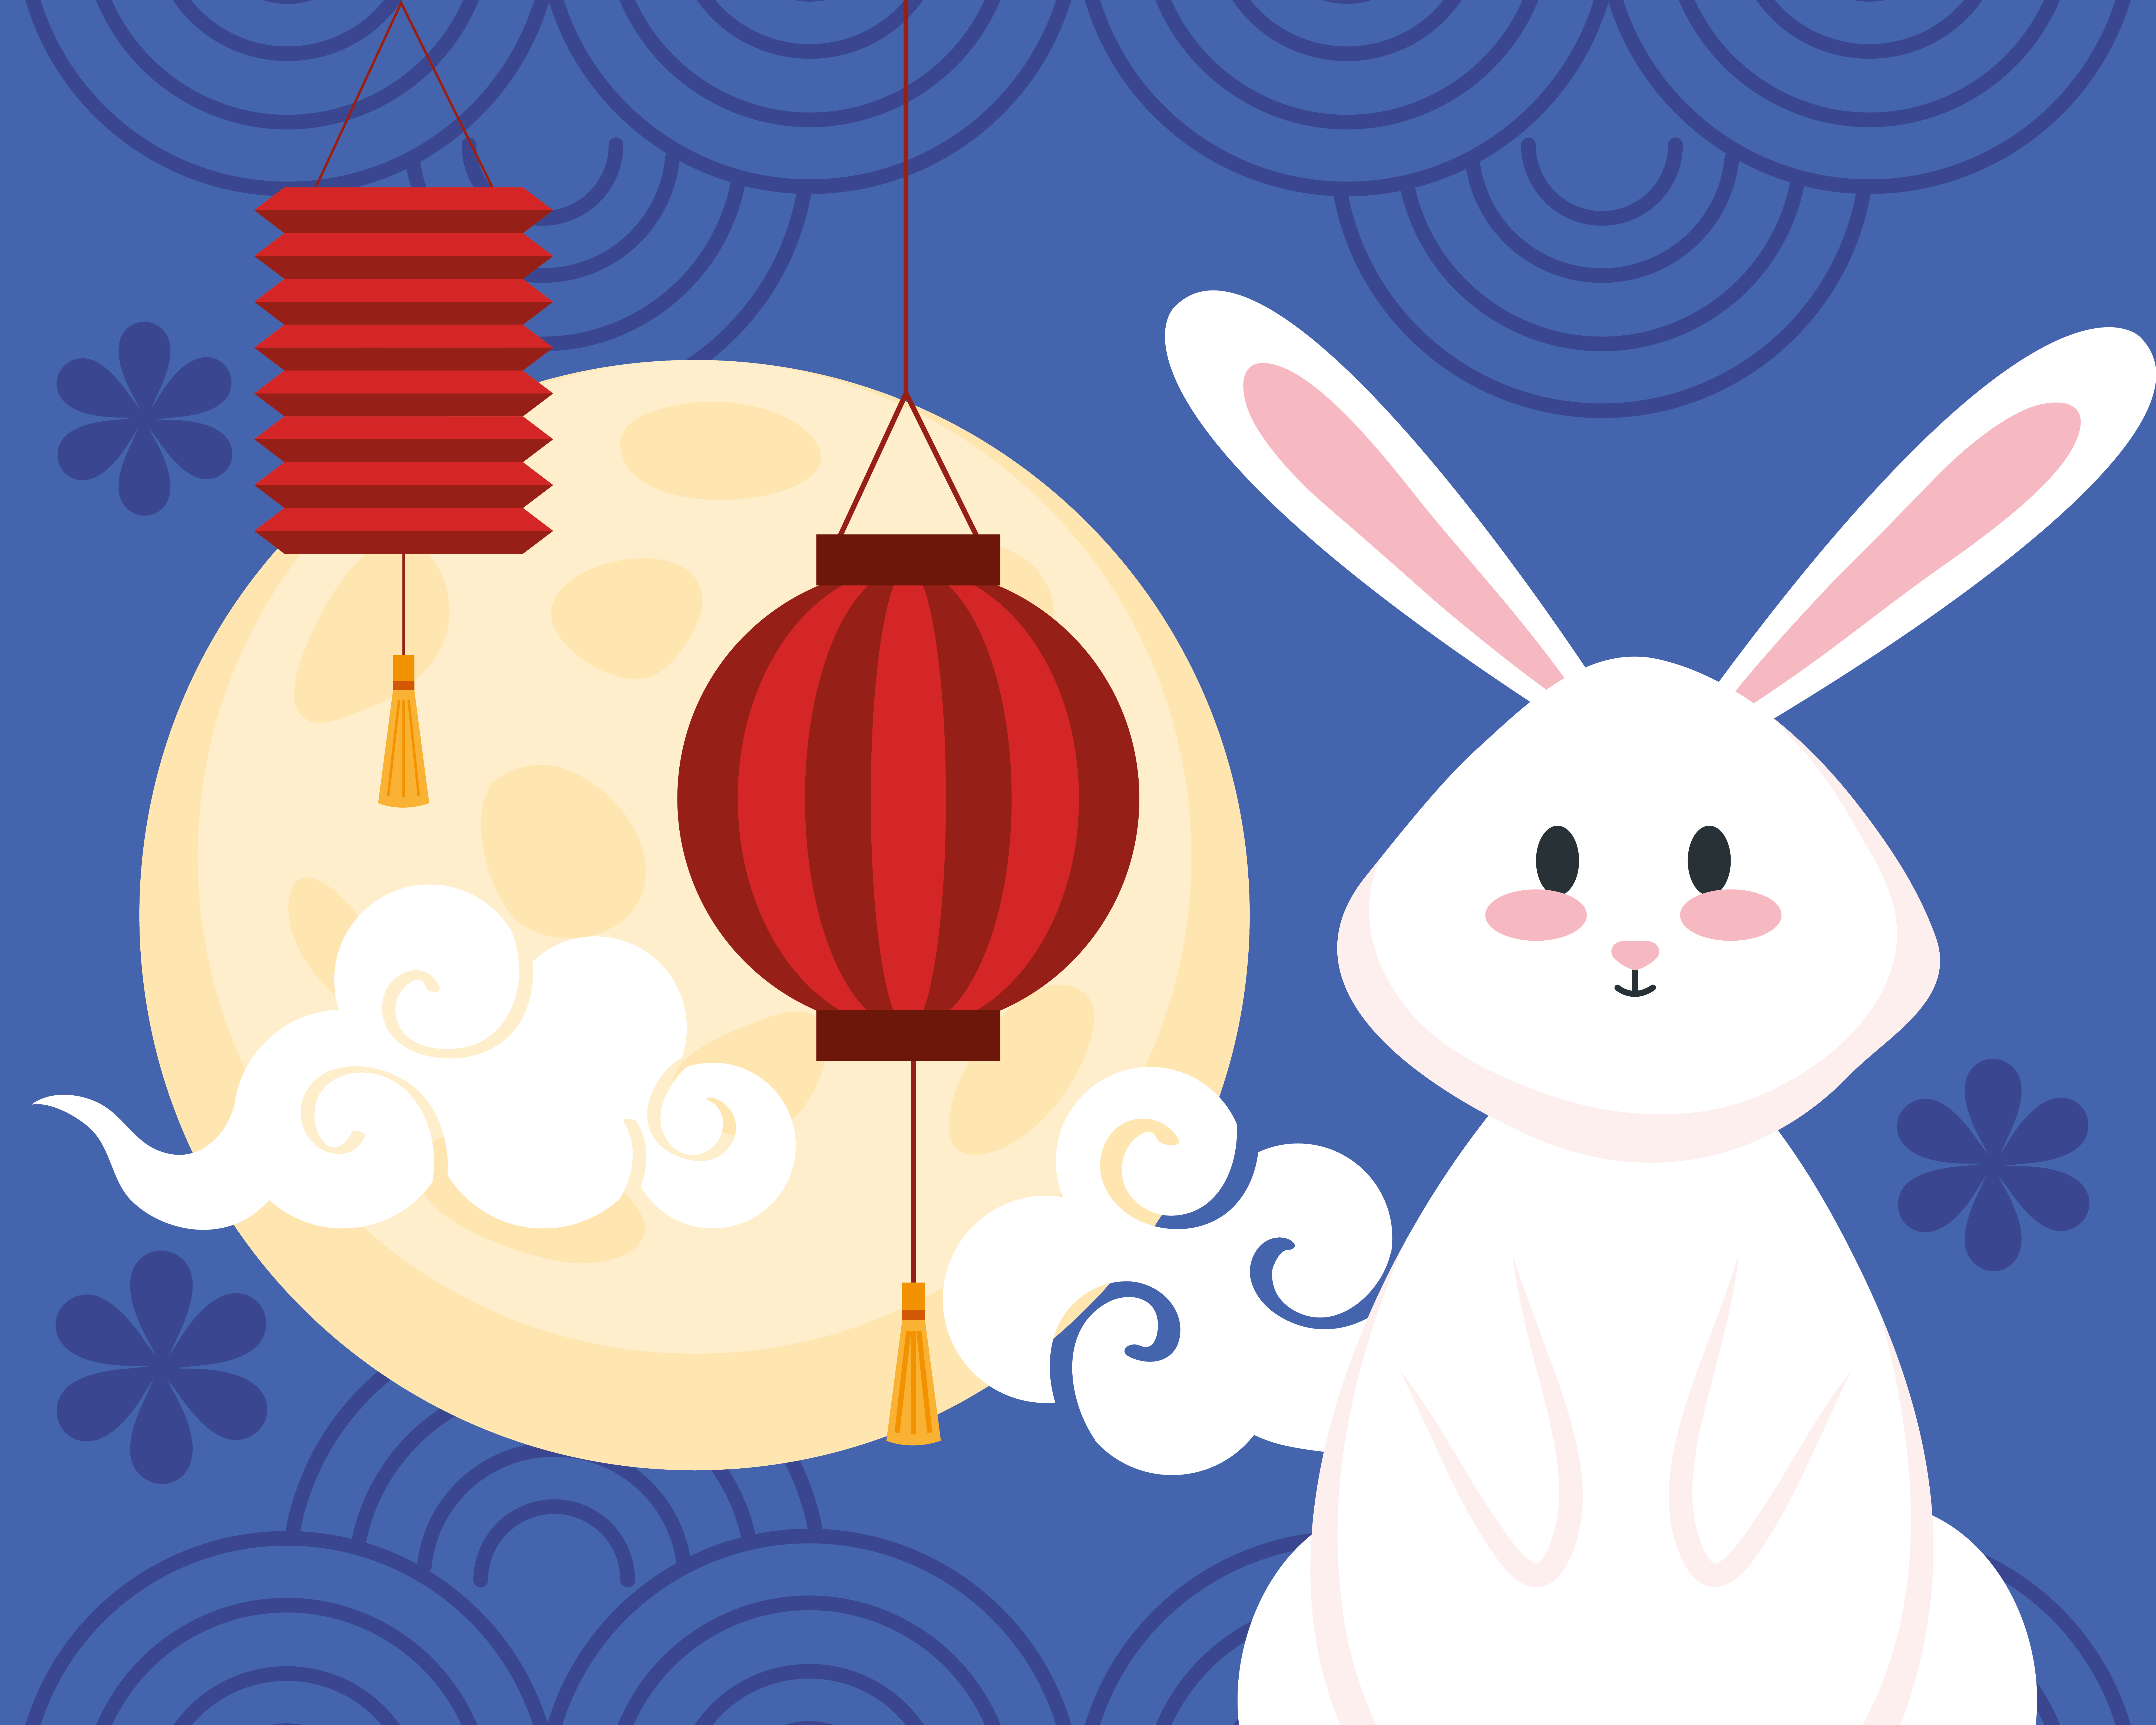 Chinese mid autumn festival with rabbit lanterns Vector Image